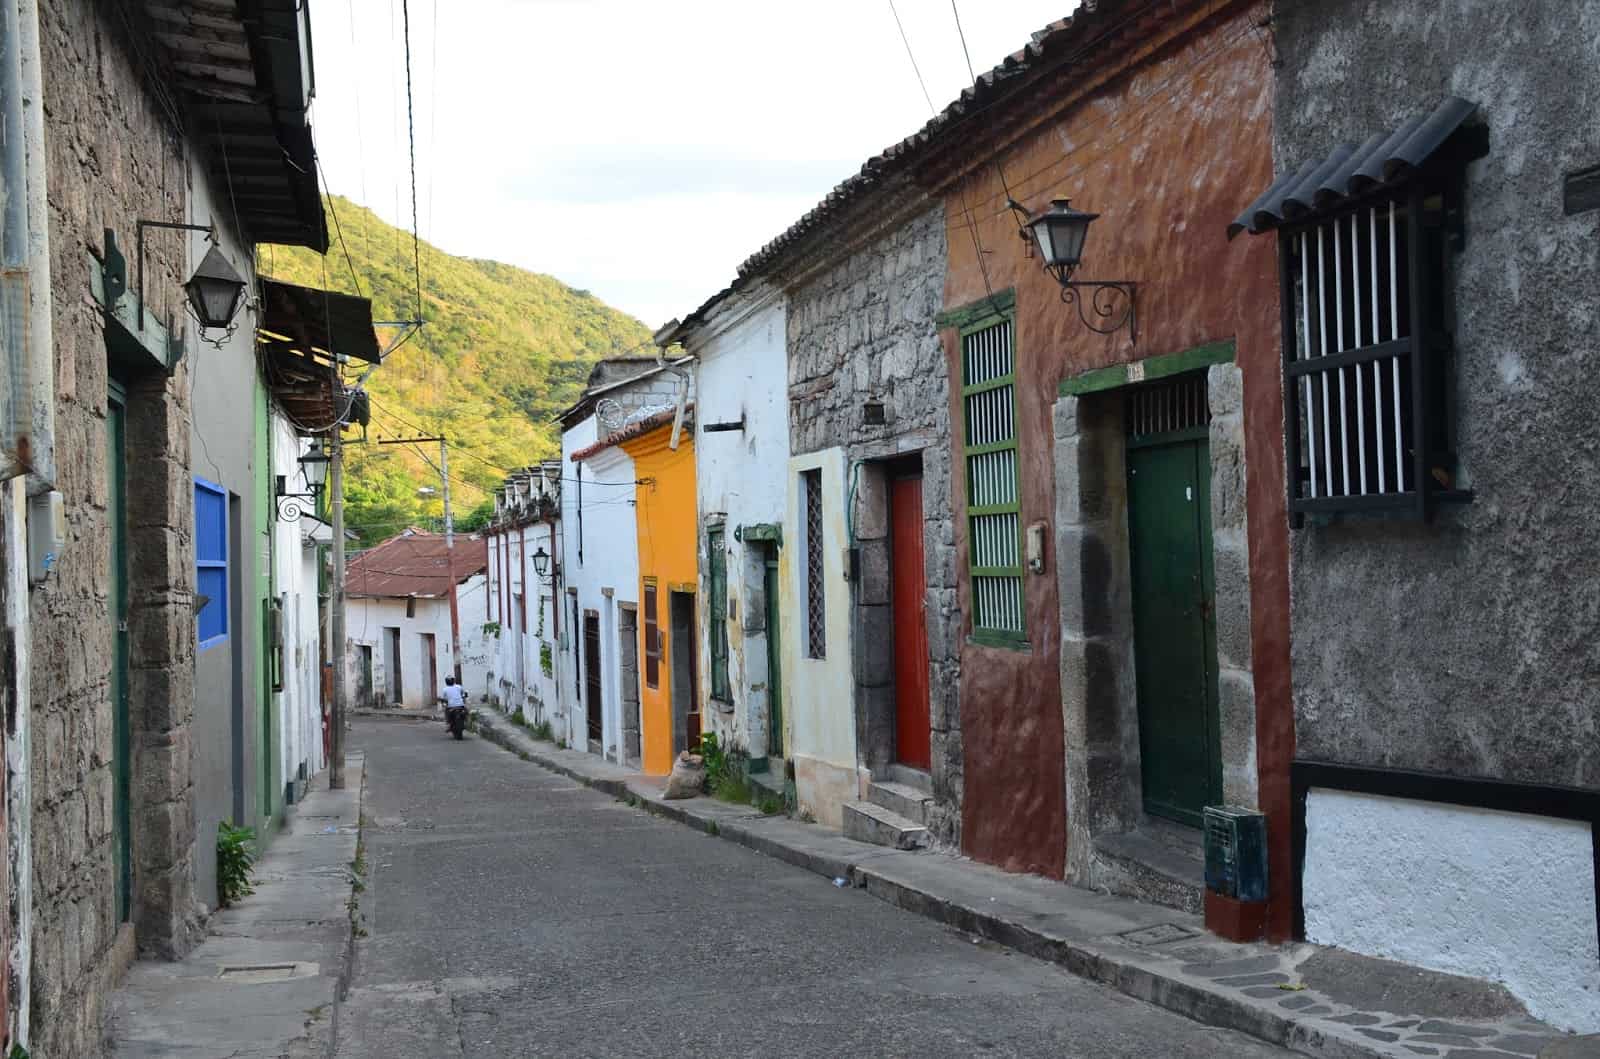 A street in Honda, Tolima, Colombia